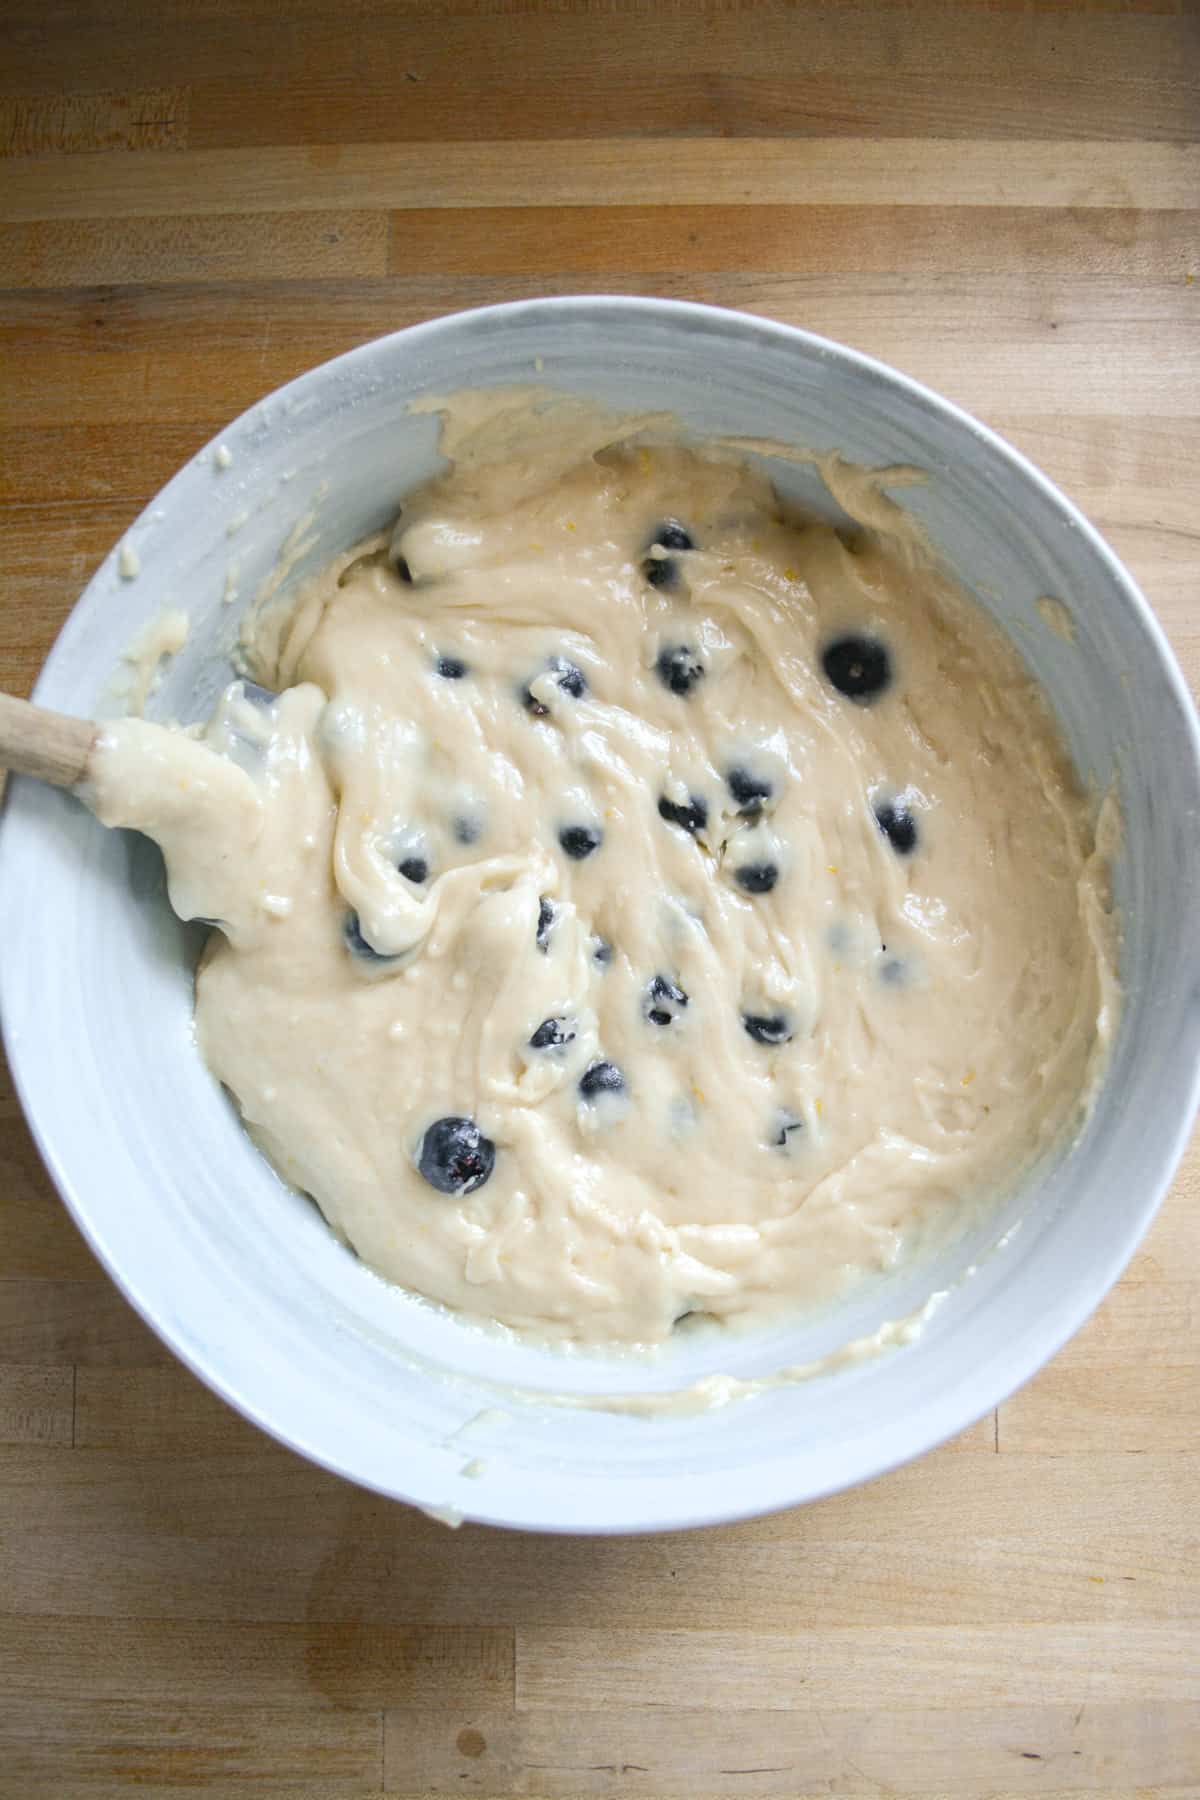 Fresh blueberries folded into the cake batter in a large bowl with a spatula off to the left.